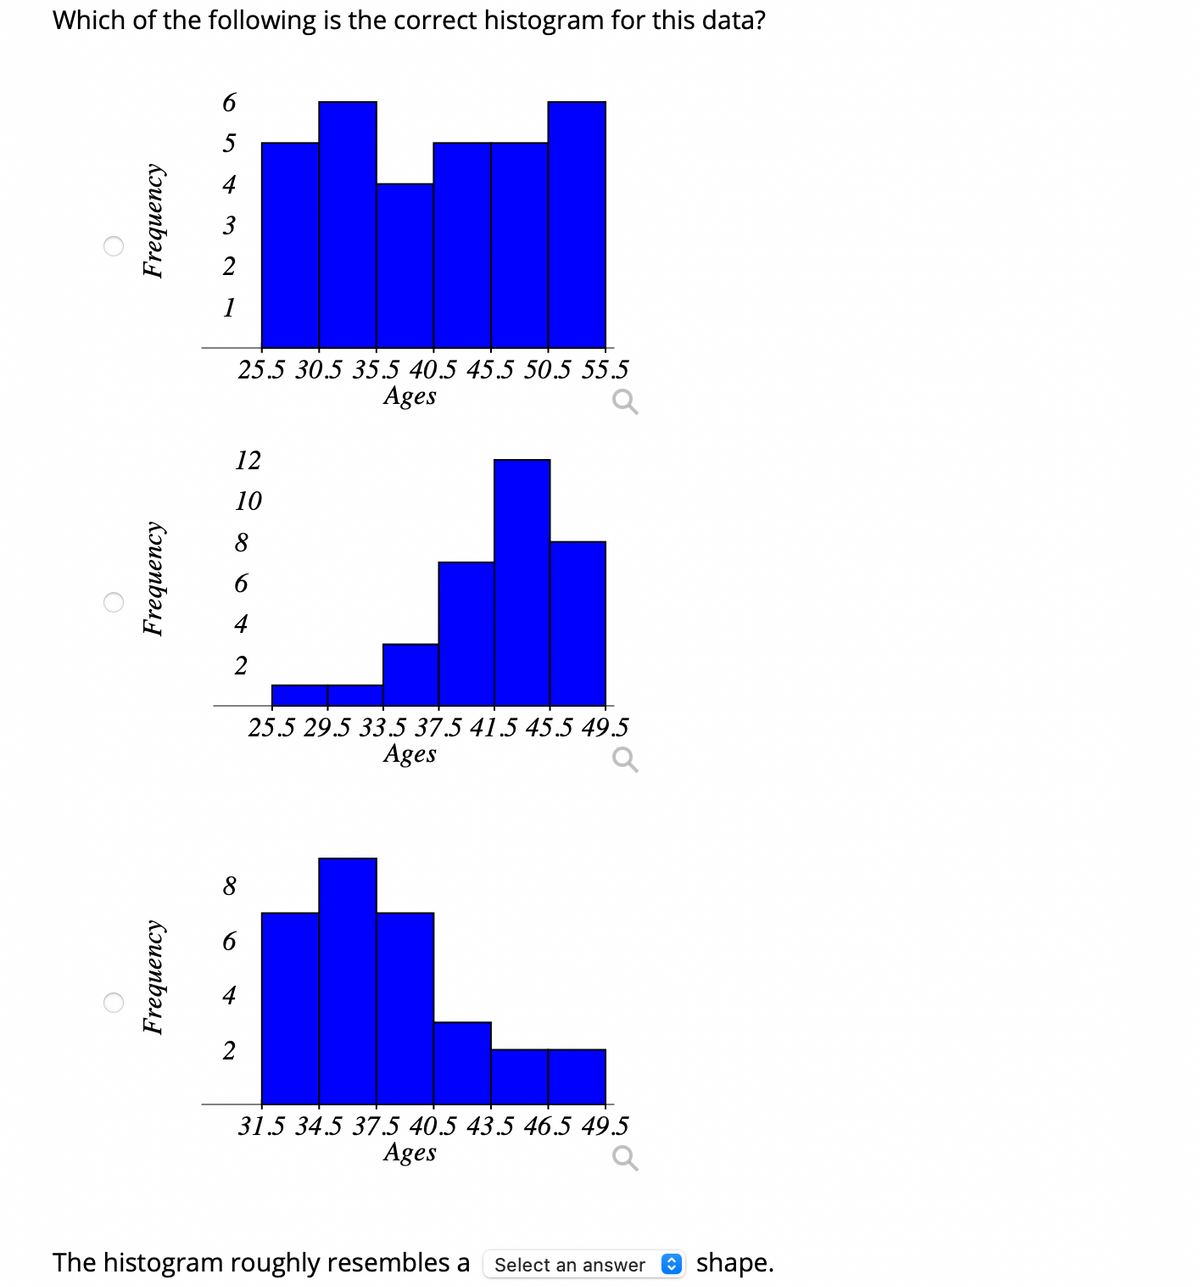 Which of the following is the correct histogram for this data?
1
25.5 30.5 35.5 40.5 45.5 50.5 55.5
Ages
12
10
8
4
2
25.5 29.5 33.5 37.5 41.5 45.5 49.5
Ages
6
4
2
31.5 34.5 37.5 40.5 43.5 46.5 49.5
Ages
The histogram roughly resembles a
O shape.
Select an answer
654 m ~
Kouənbəs
Kouənbəu
Frequency
